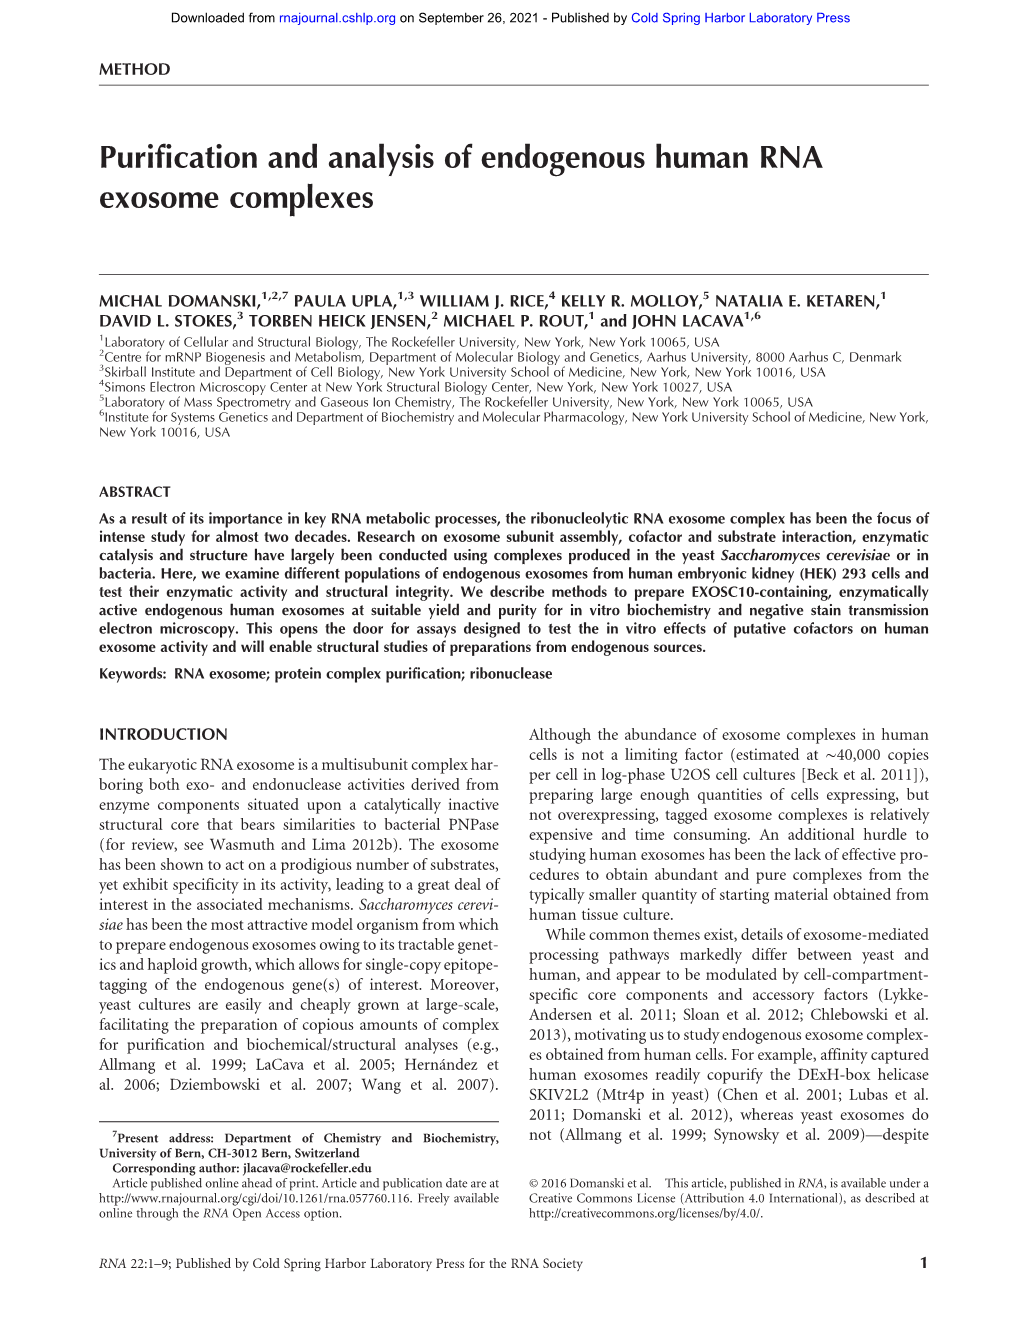 Purification and Analysis of Endogenous Human RNA Exosome Complexes